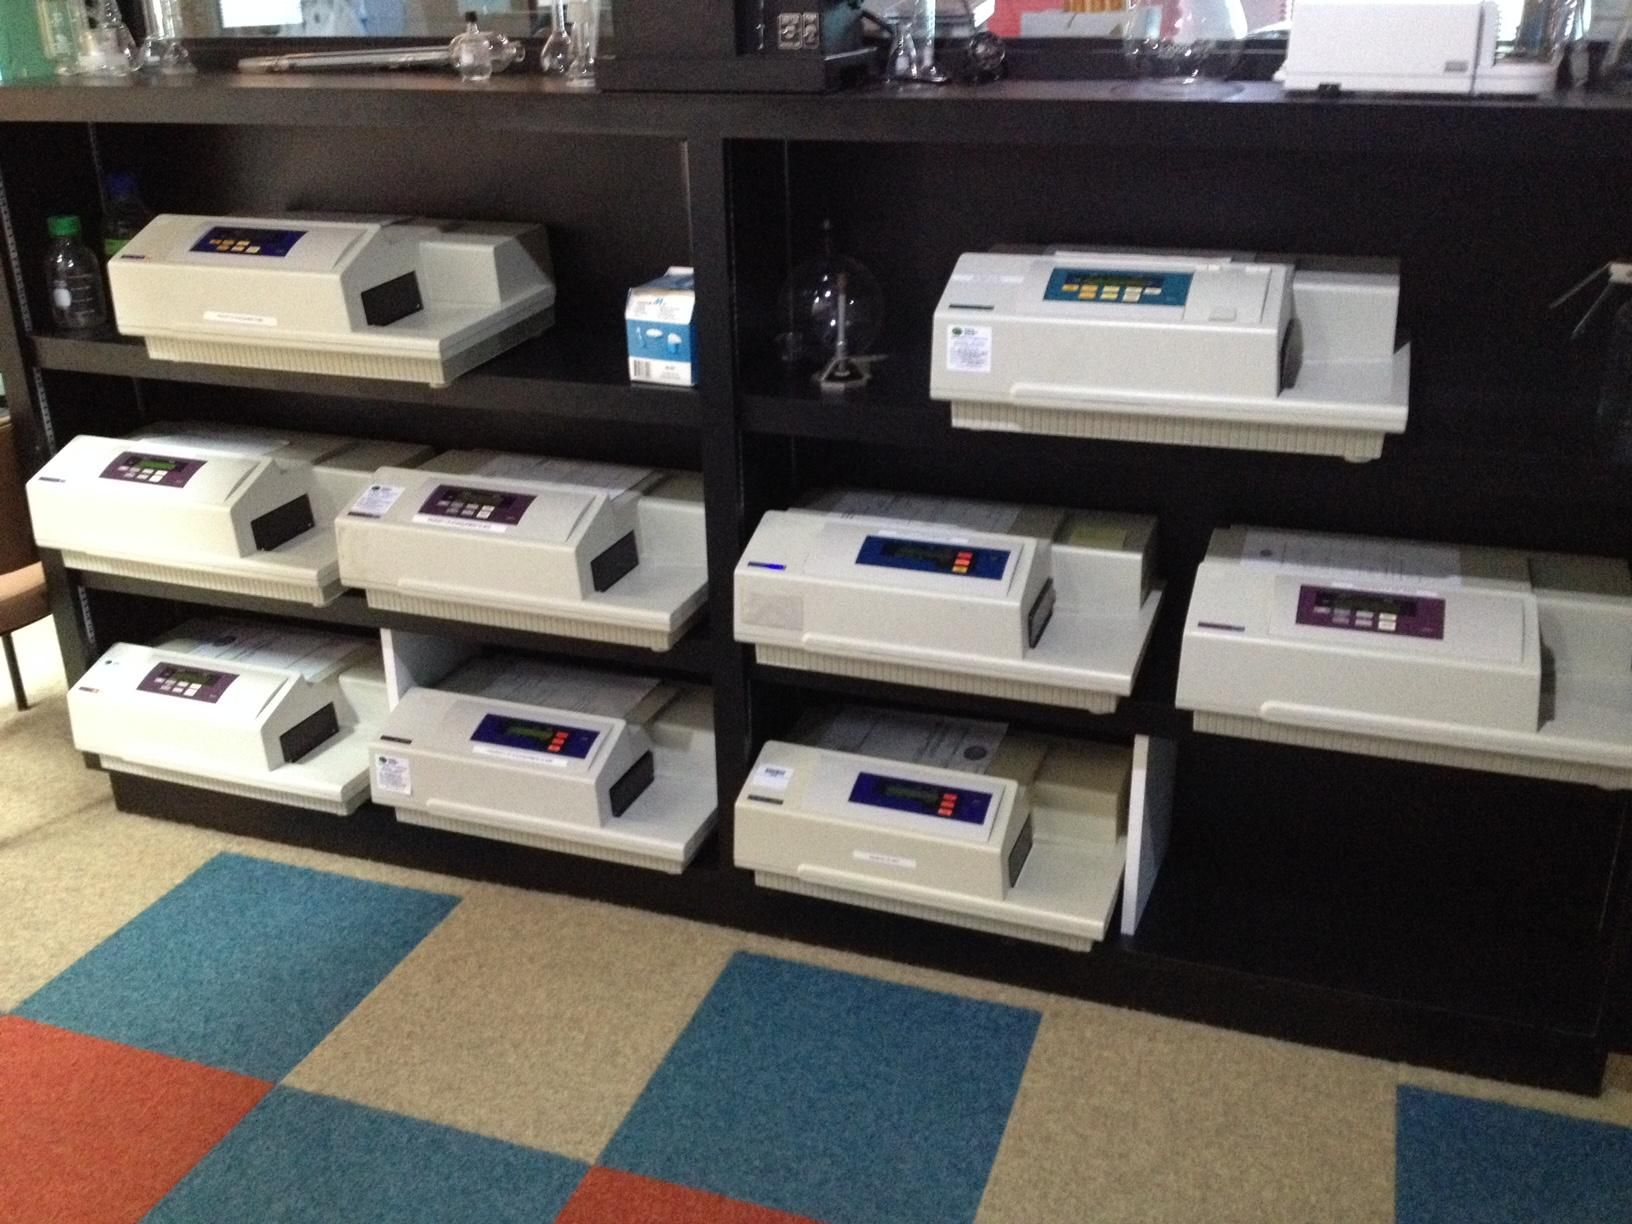 Fully Refurbished Molecular Devices Microplate Readers With One Year Warranty